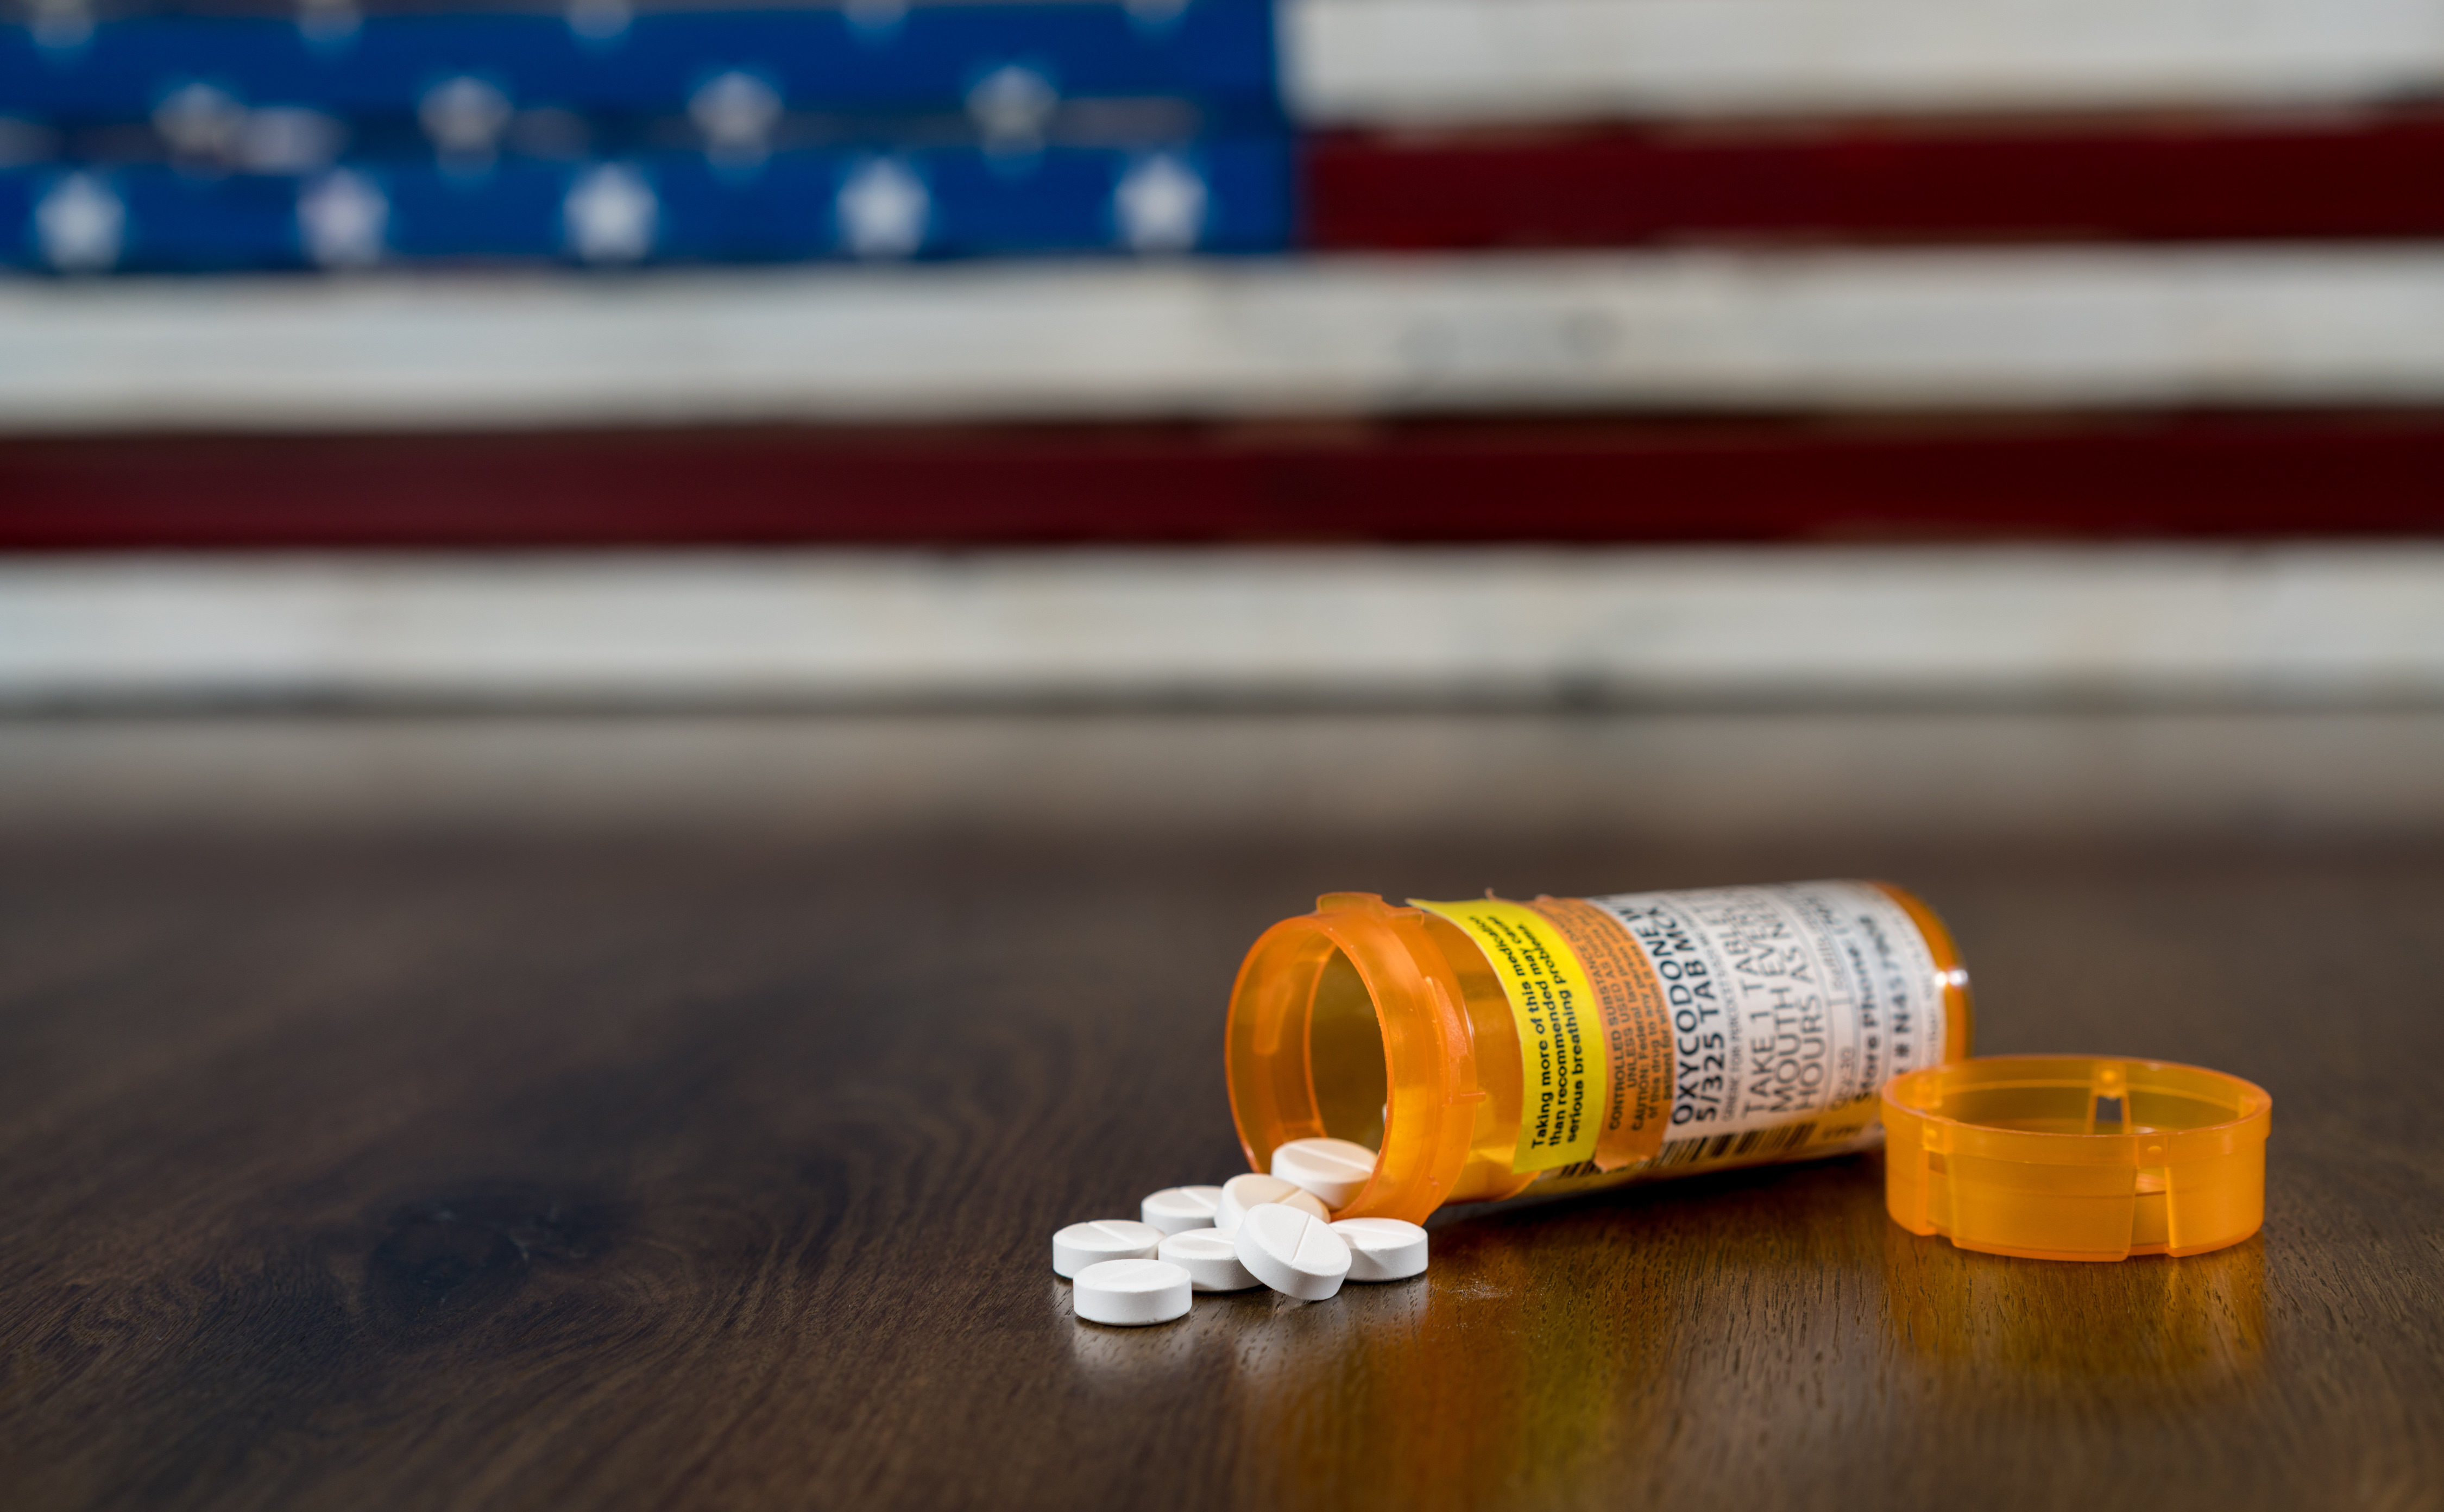 How AI Can Help Combat the Opioid Epidemic